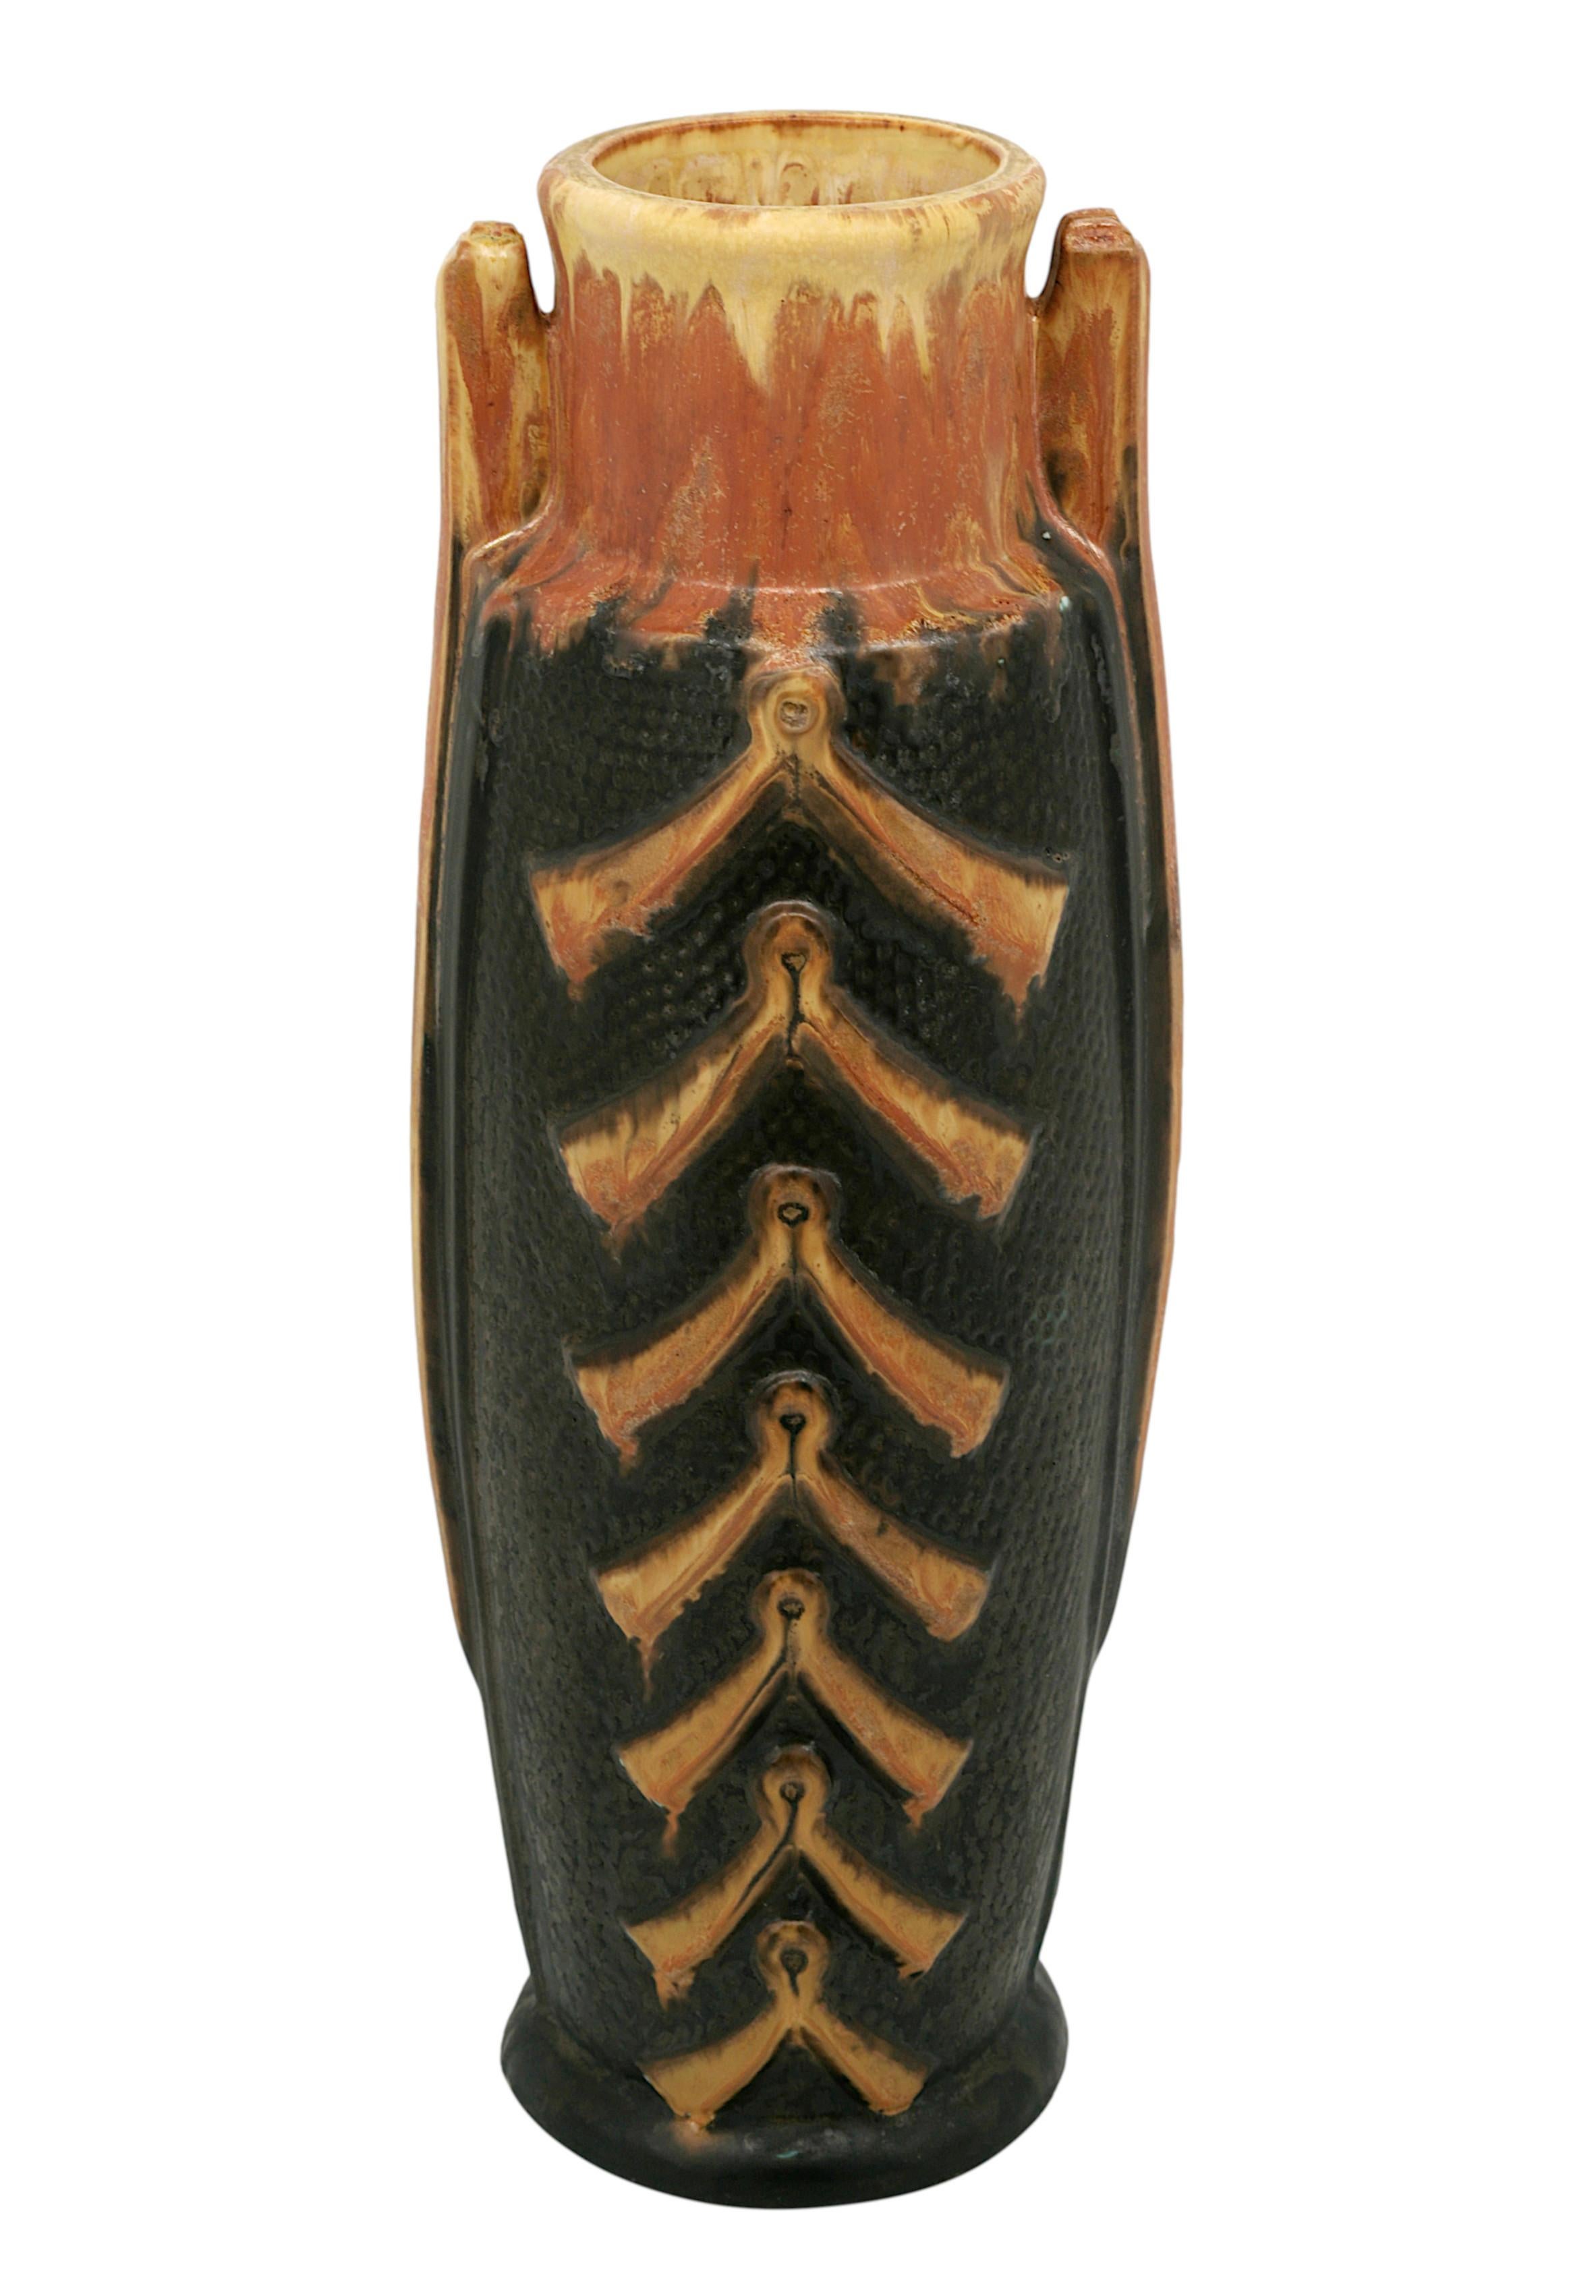 Gilbert METENIER Tall French Art Deco Stoneware Vase 1920s In Excellent Condition For Sale In Saint-Amans-des-Cots, FR